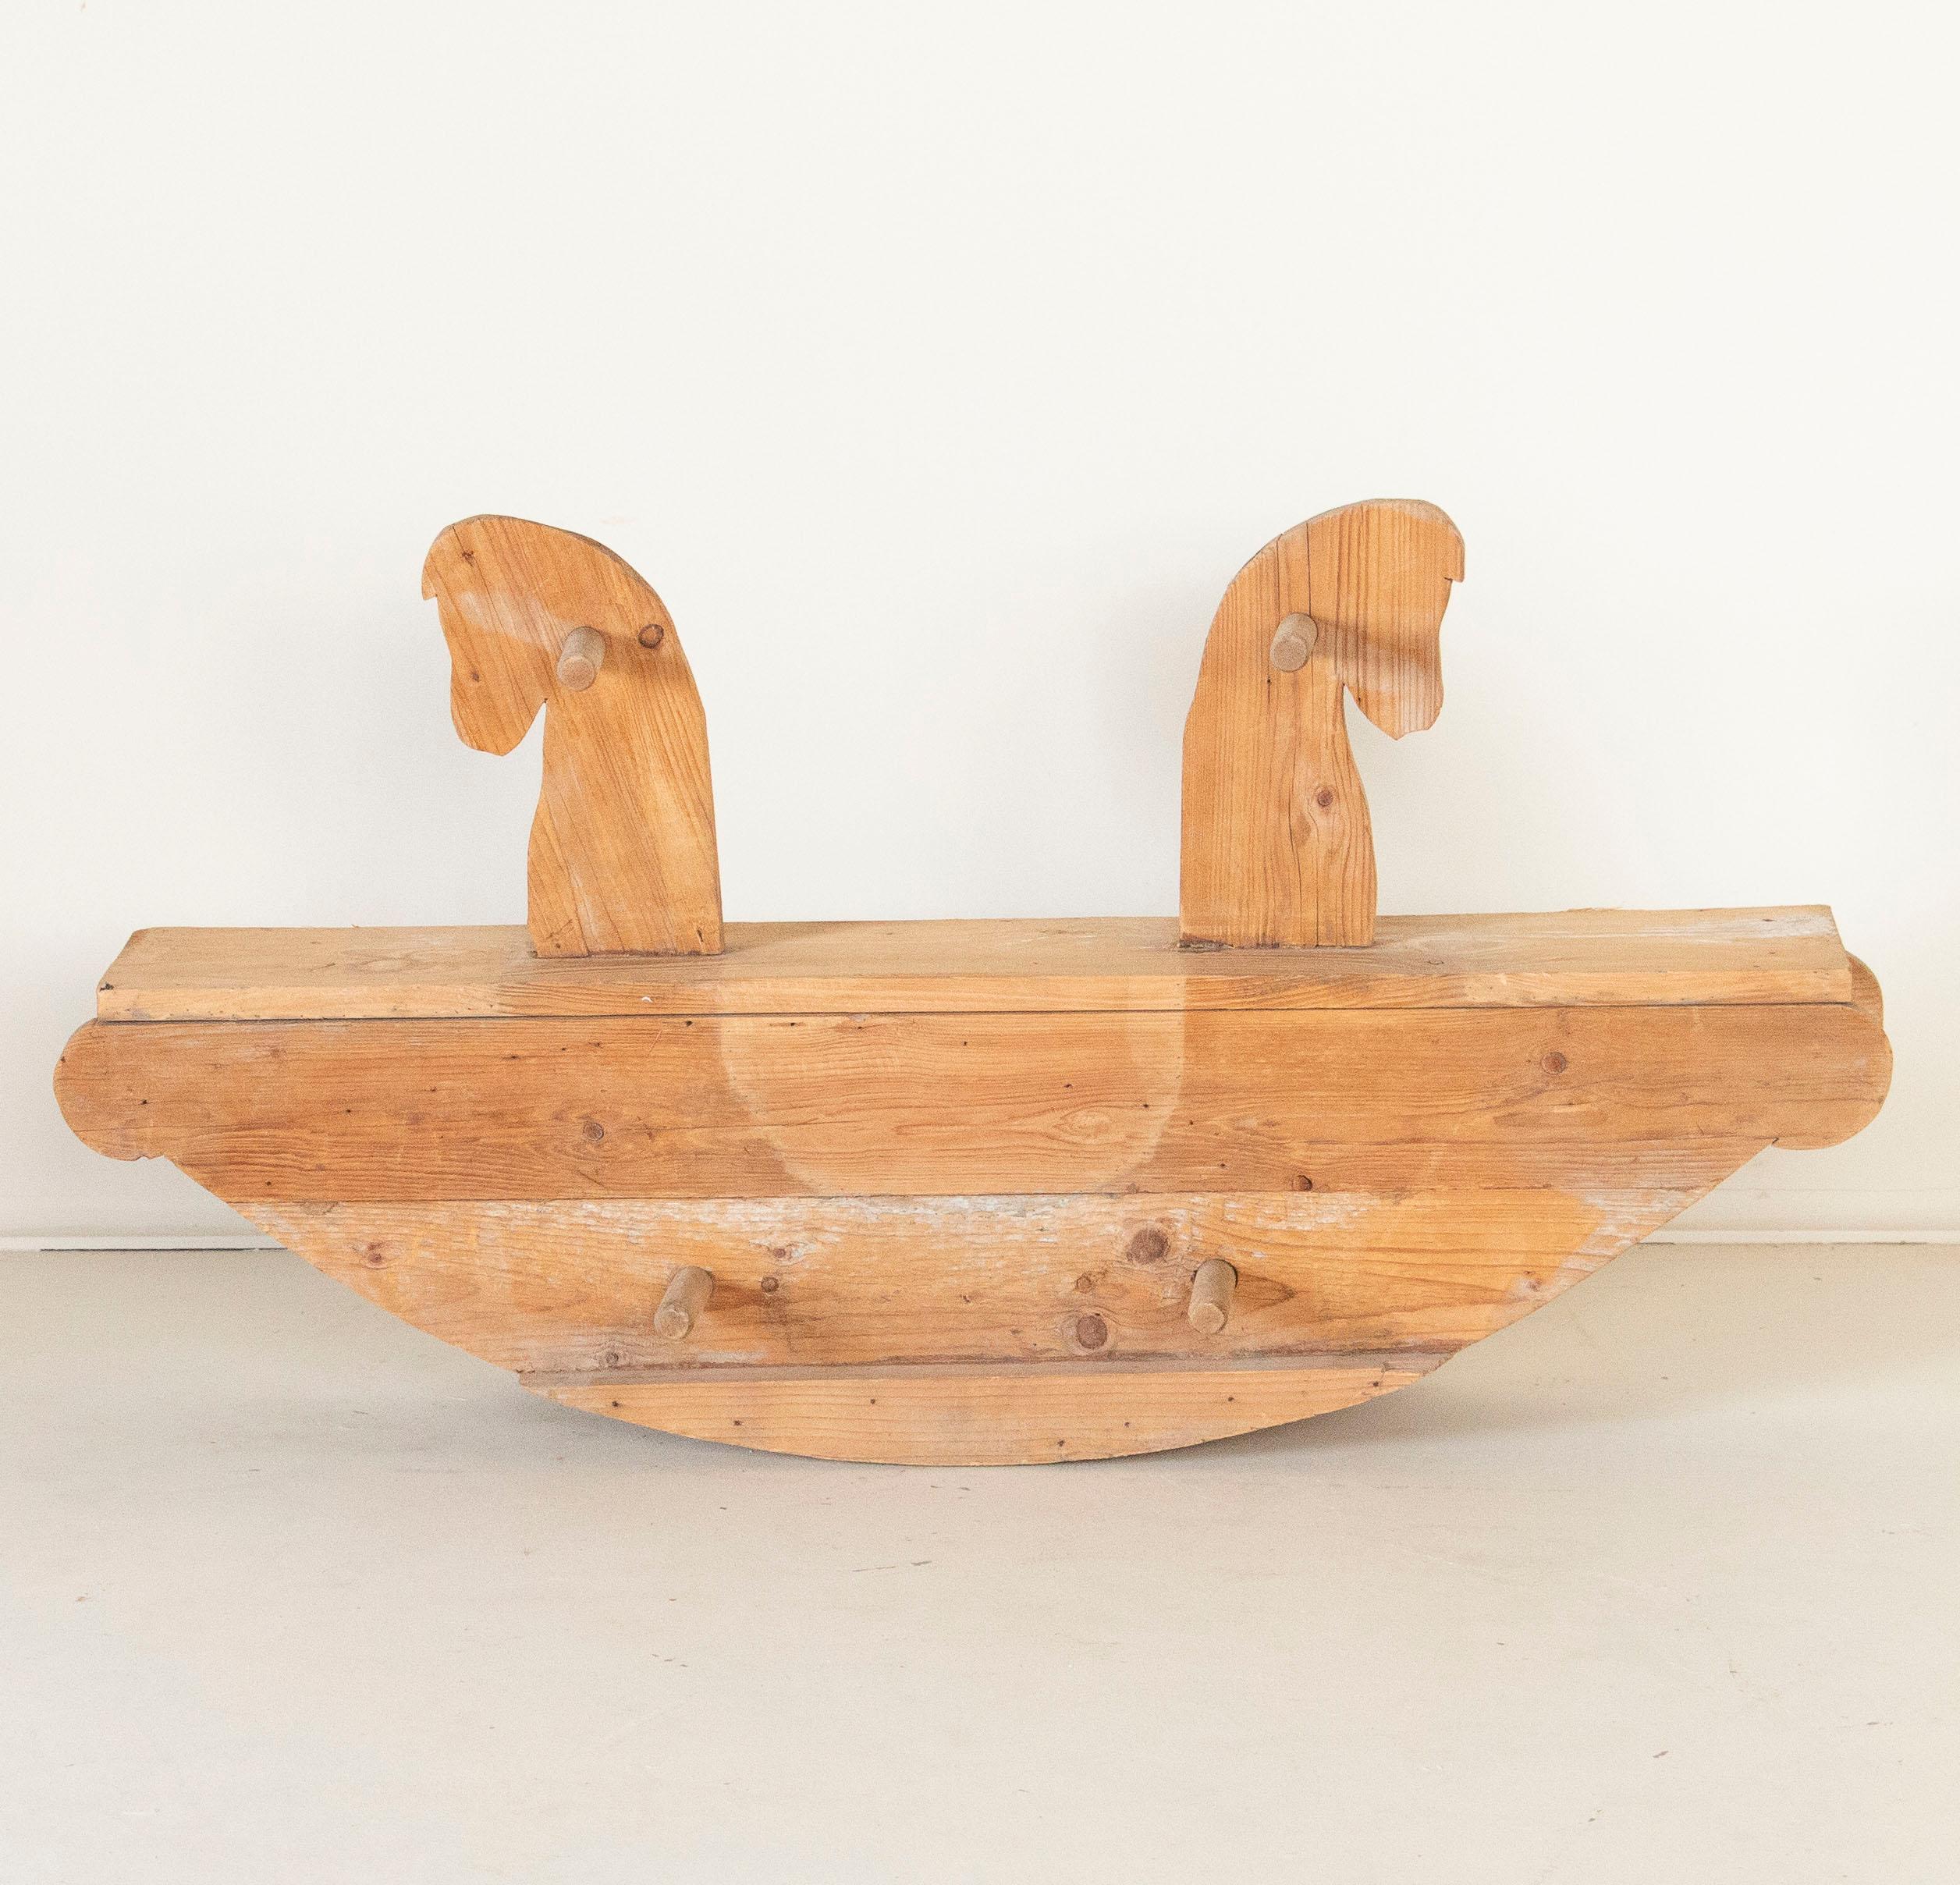 This antique child's seesaw in the form of a rocking horse was made for two to play and constructed out of pine. Also referred to as a teetertotter, this working toy has an almost folk art quality with it's simple construction and style. Nothing has